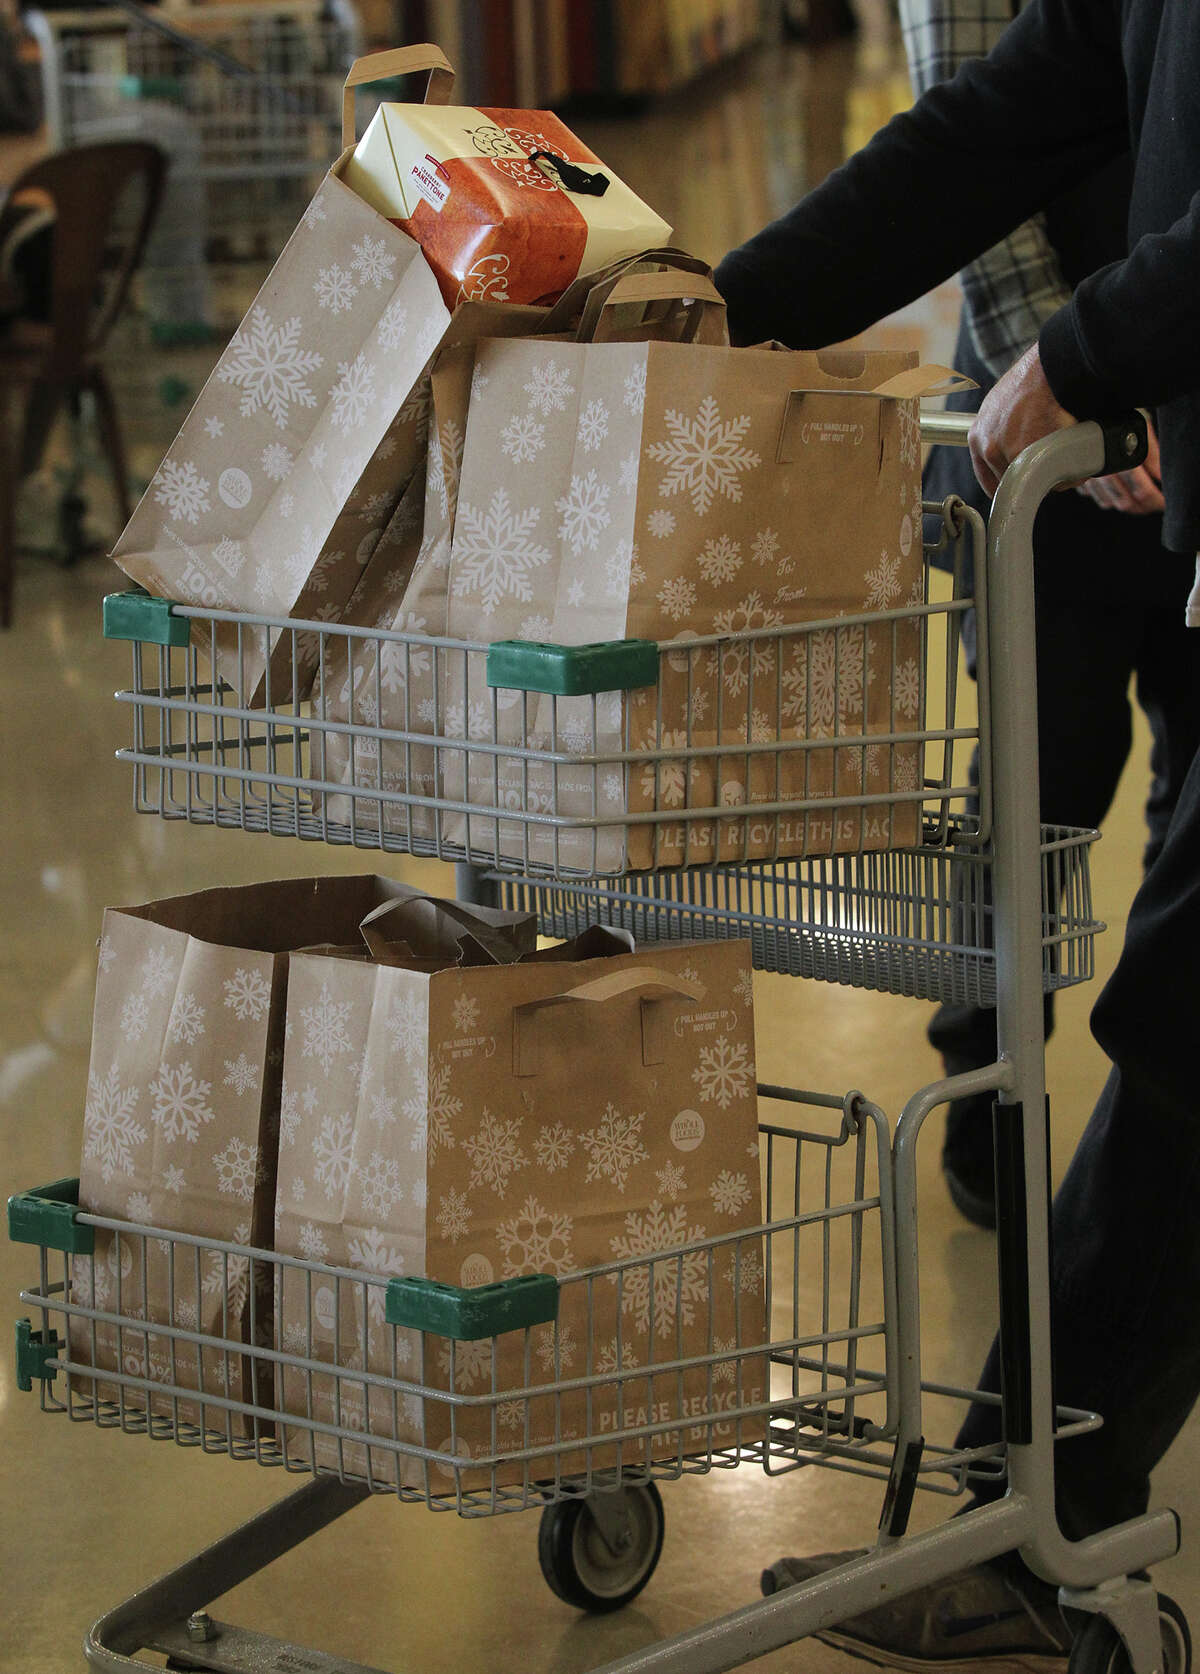 A customer pushes paper bags full of groceries on a cart Thursday November 14, 2013. Many retailers use single-use plastic bags but Whole Foods has phased them out and uses paper and reusable bags. They also give discounts to customers that reuse their paper bags and reusable bags.